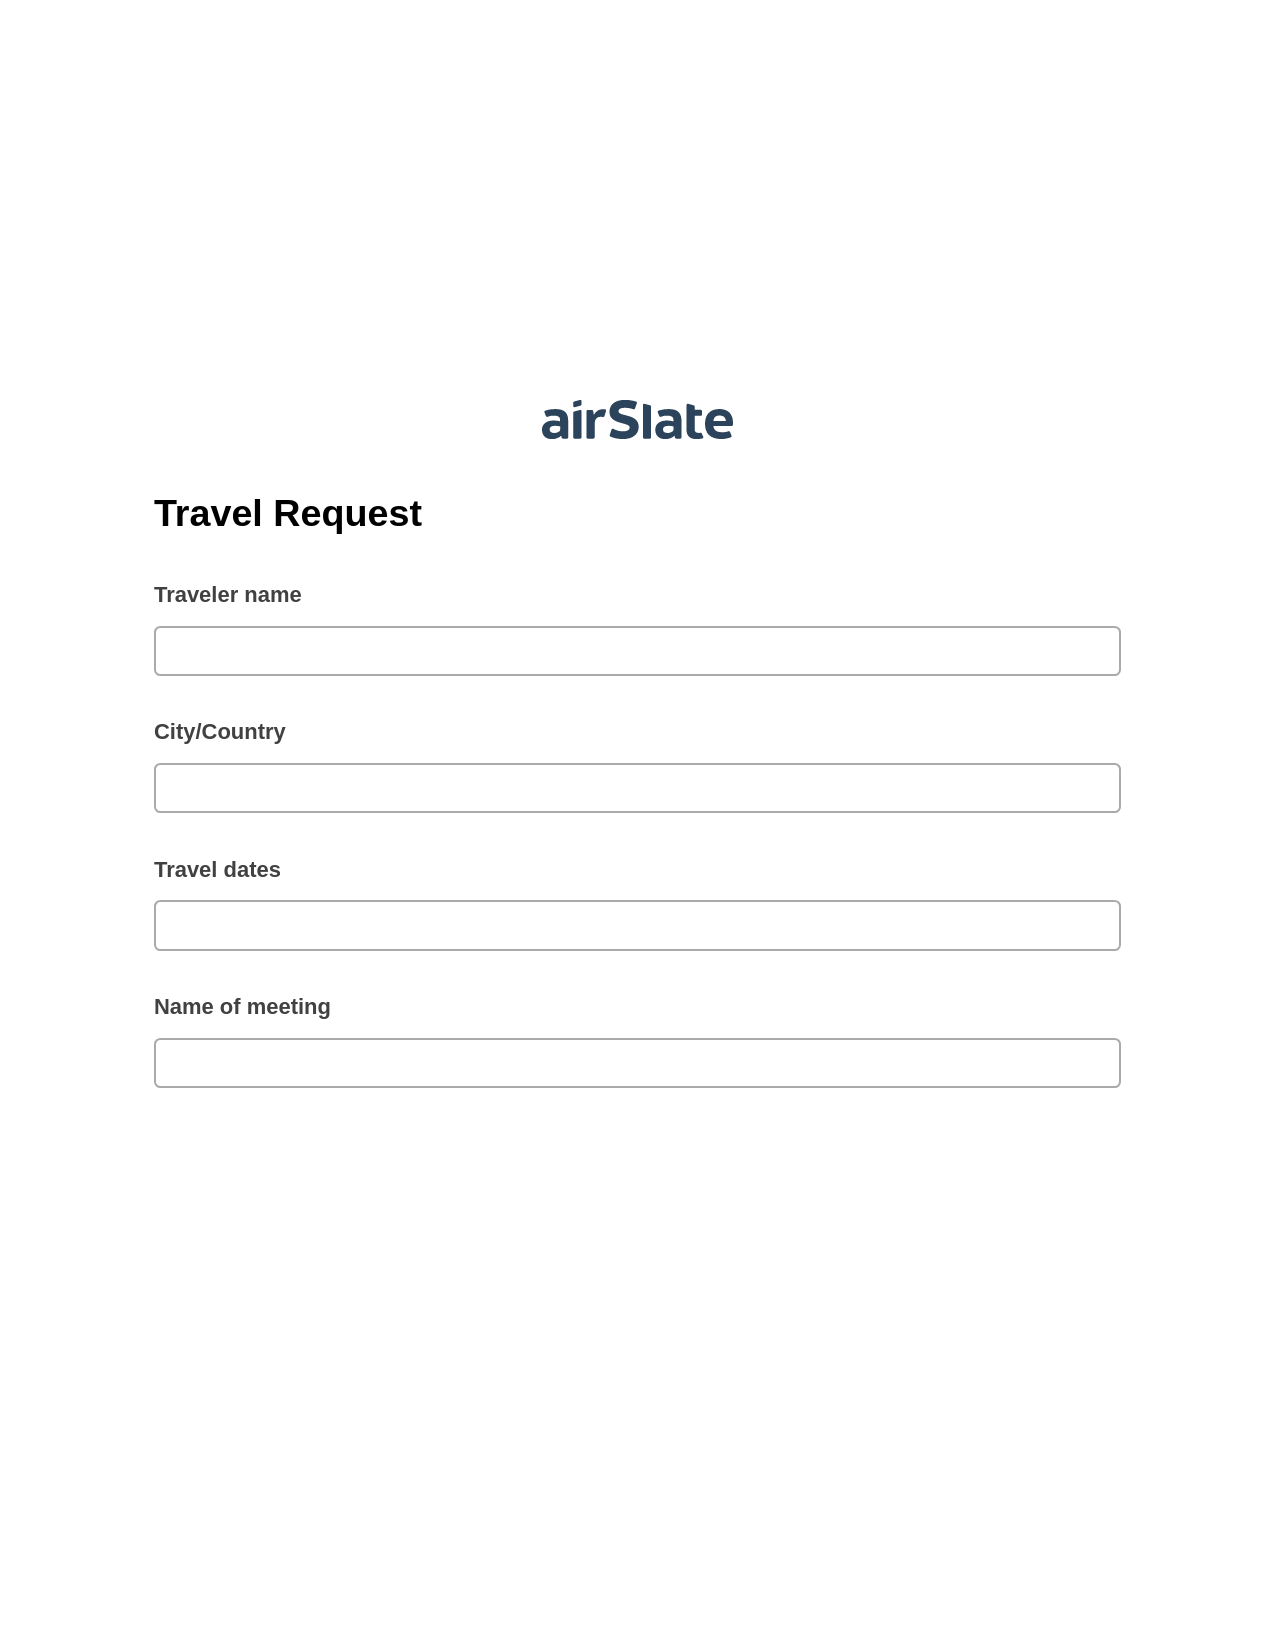 Travel Request Pre-fill from Salesforce Record Bot, Update Salesforce Record Bot, Slack Notification Postfinish Bot